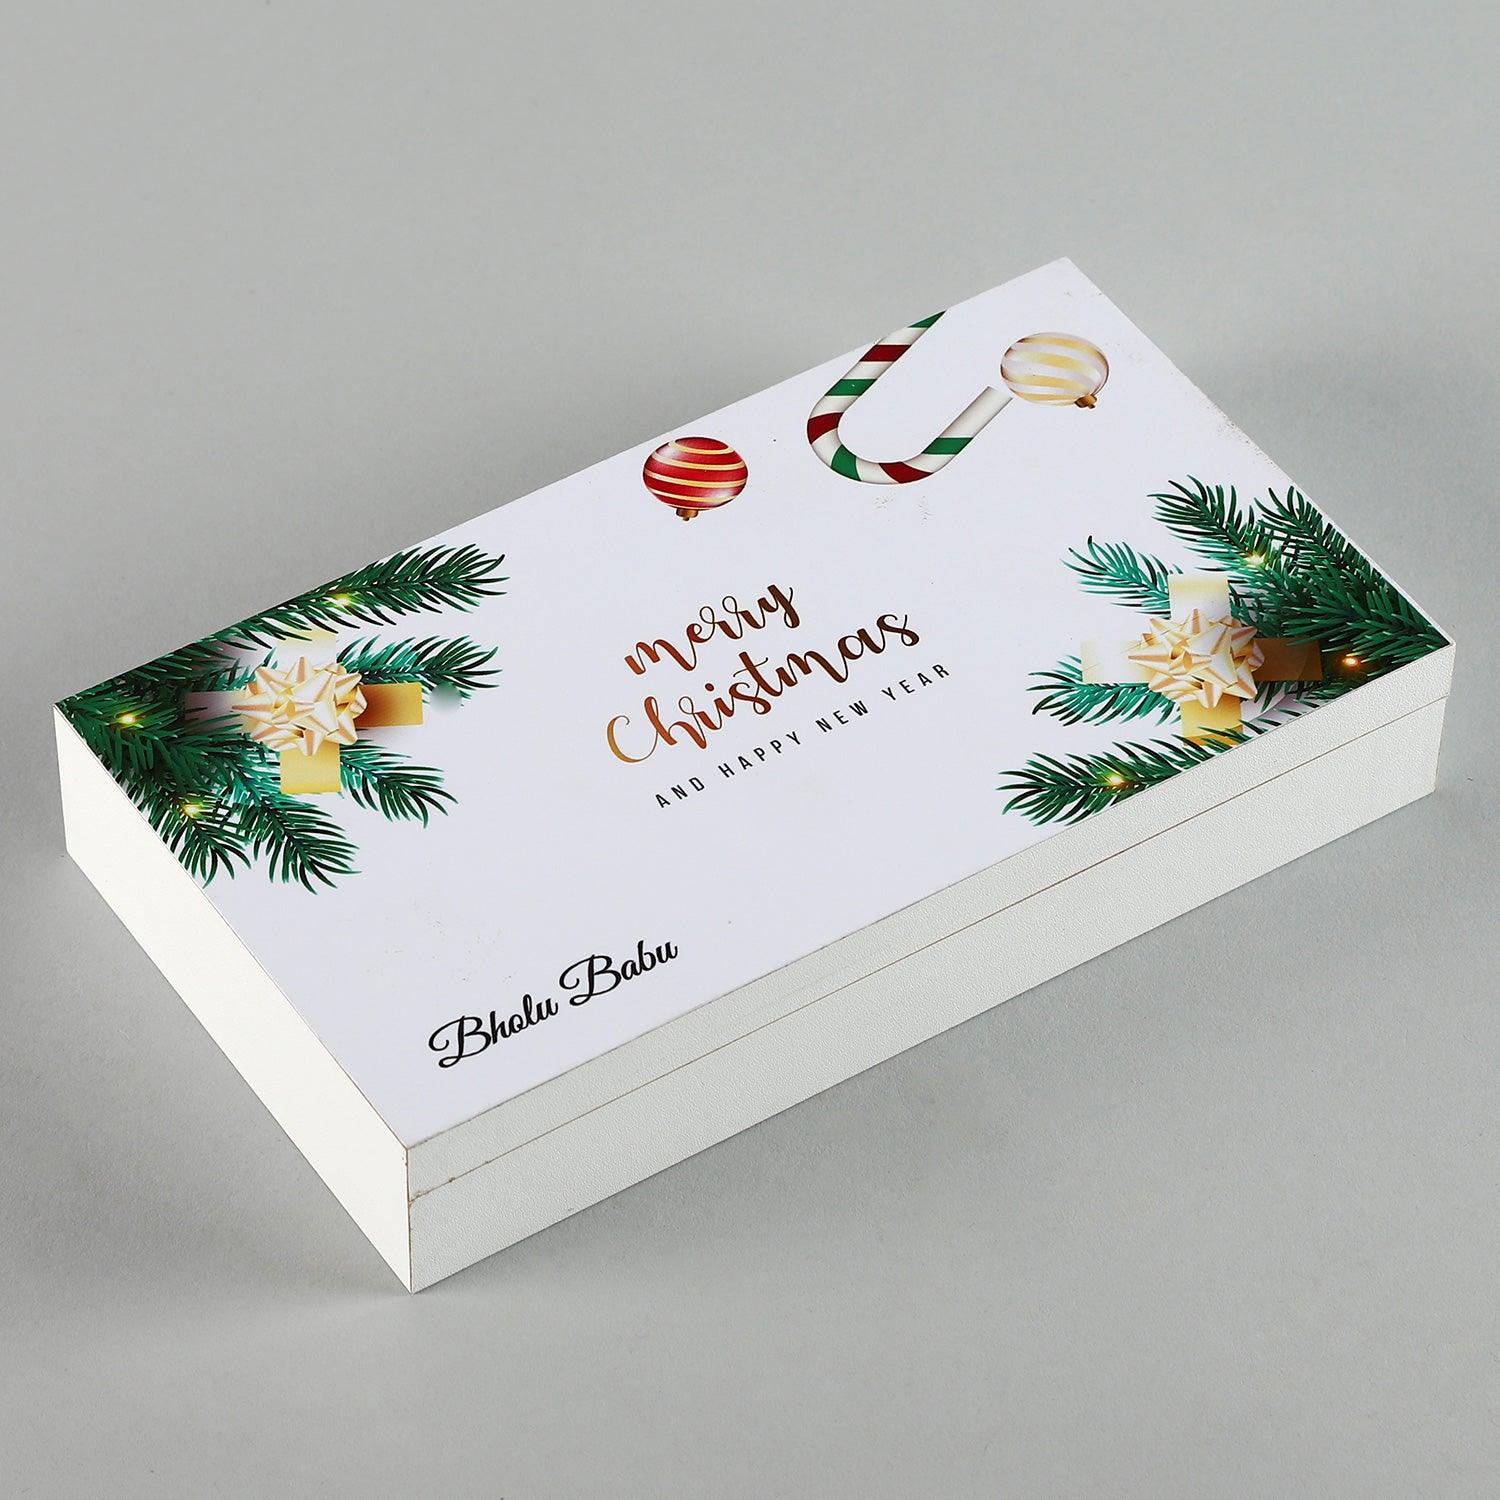 Best Gifts for Christmas, Gift Ideas - Choco Manual ART